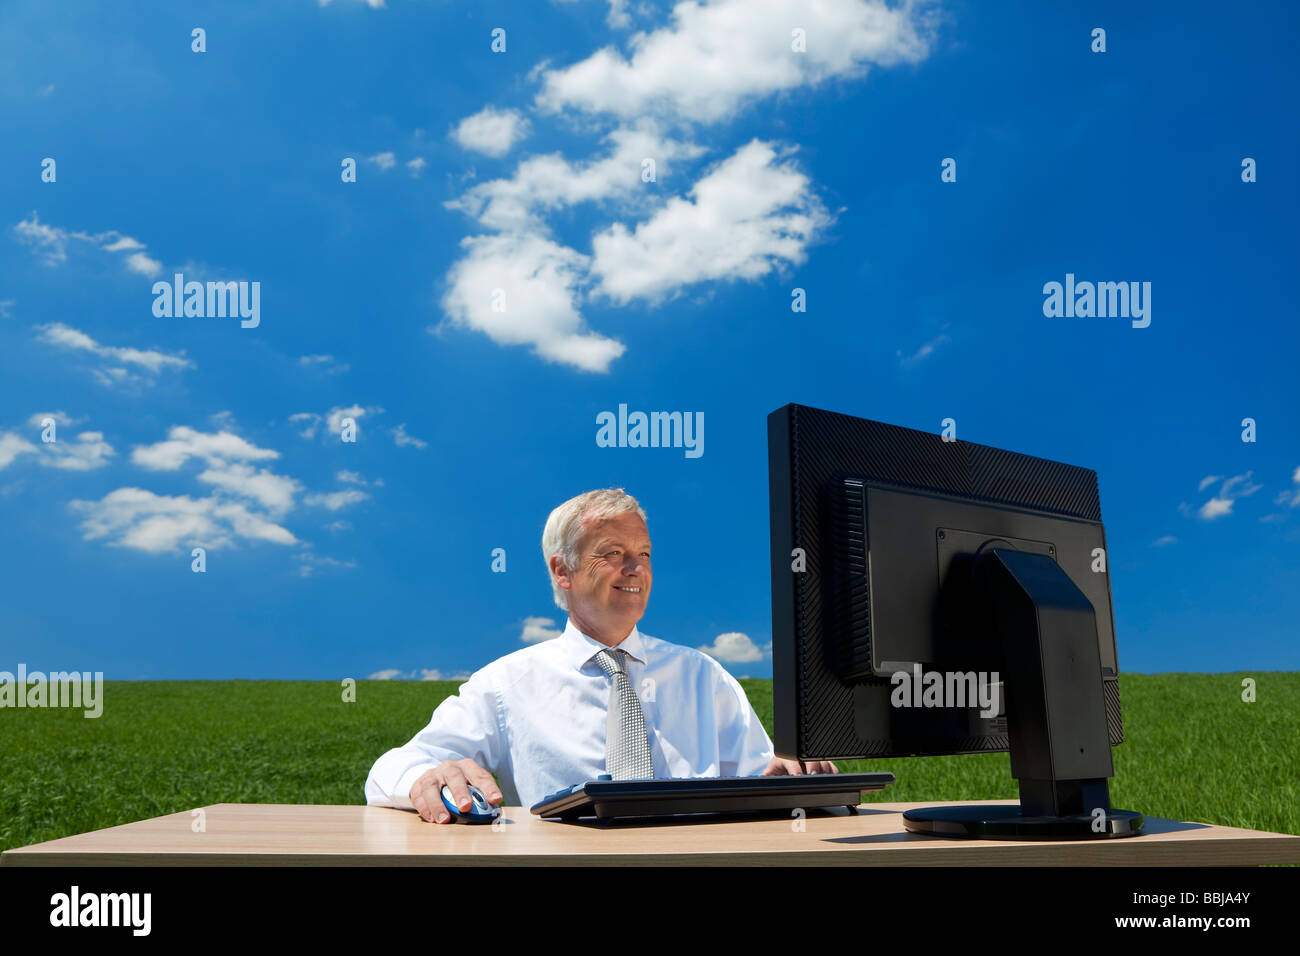 Business concept shot showing an older male executive using a computer in a green field with a blue sky and fluffy white clouds Stock Photo